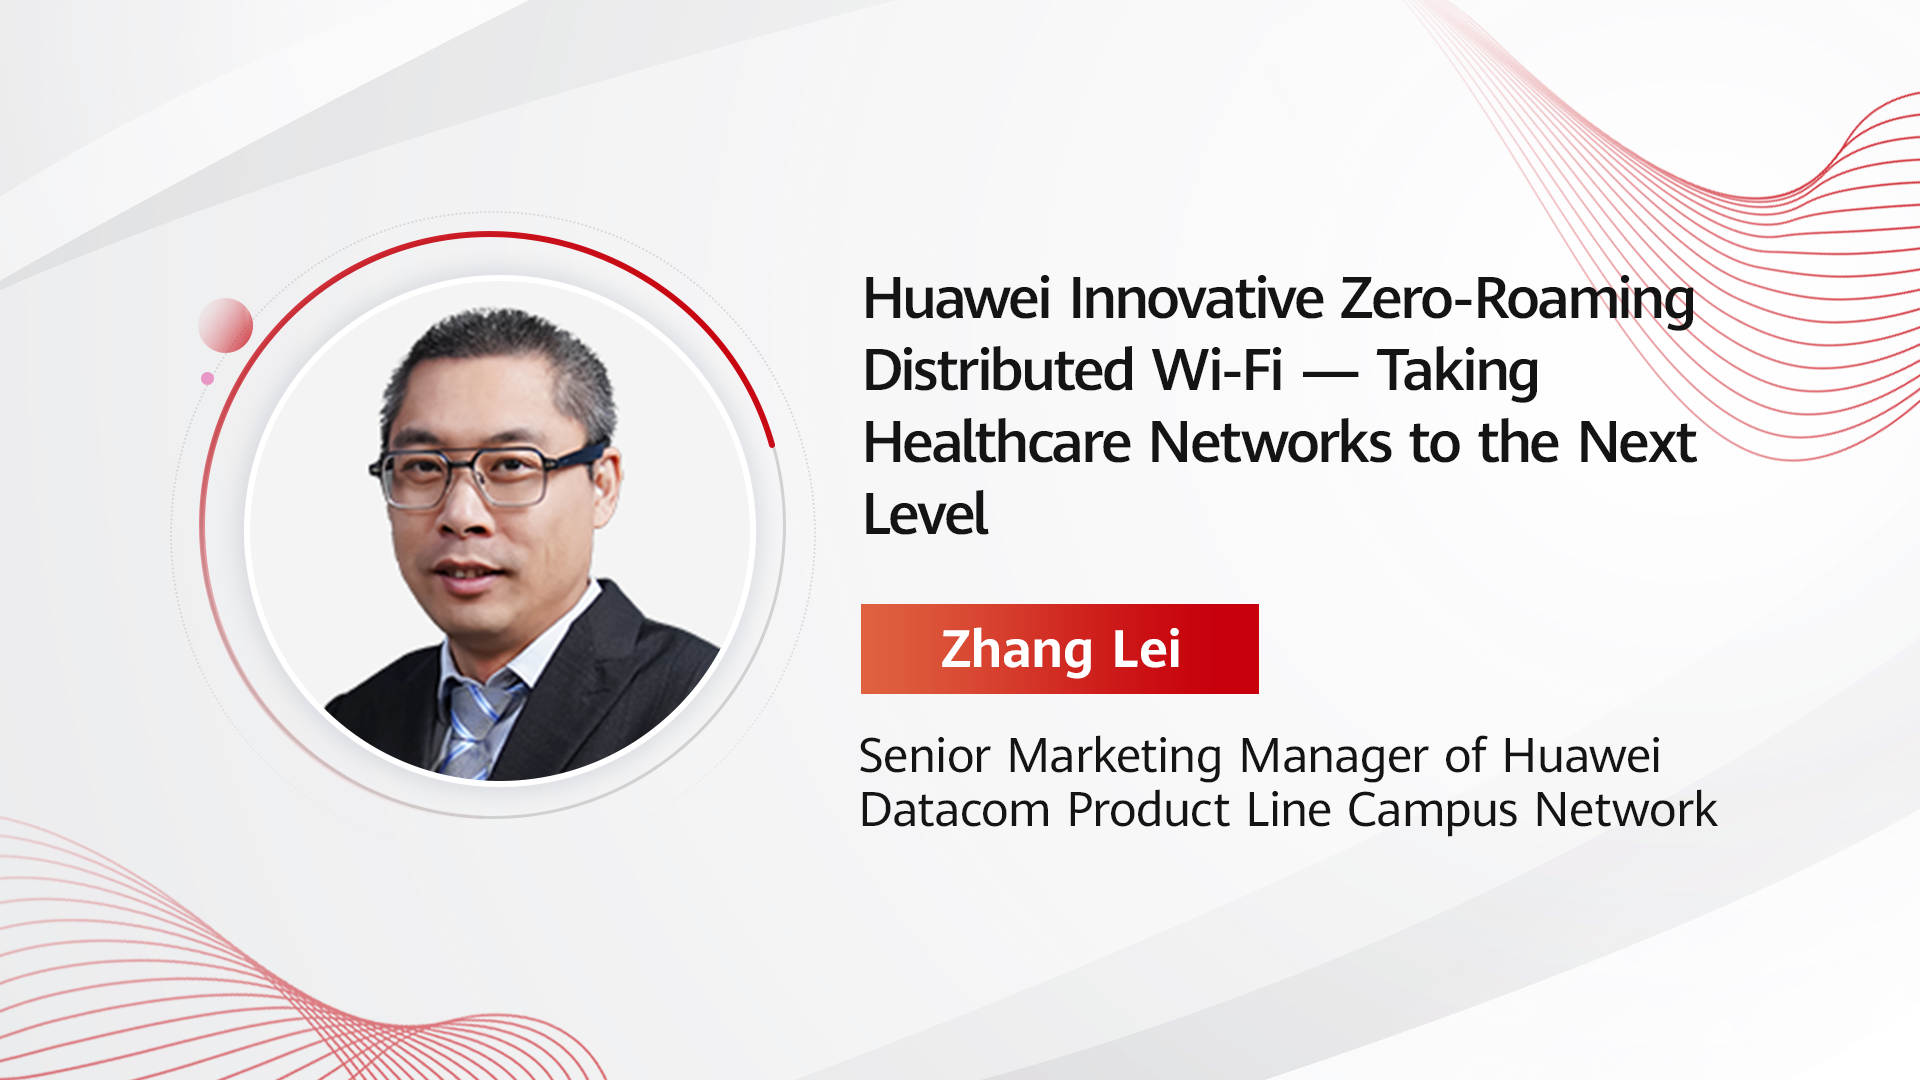 Huawei Innovative Zero-Roaming Distributed Wi-Fi — Taking Healthcare Networks to the Next Level